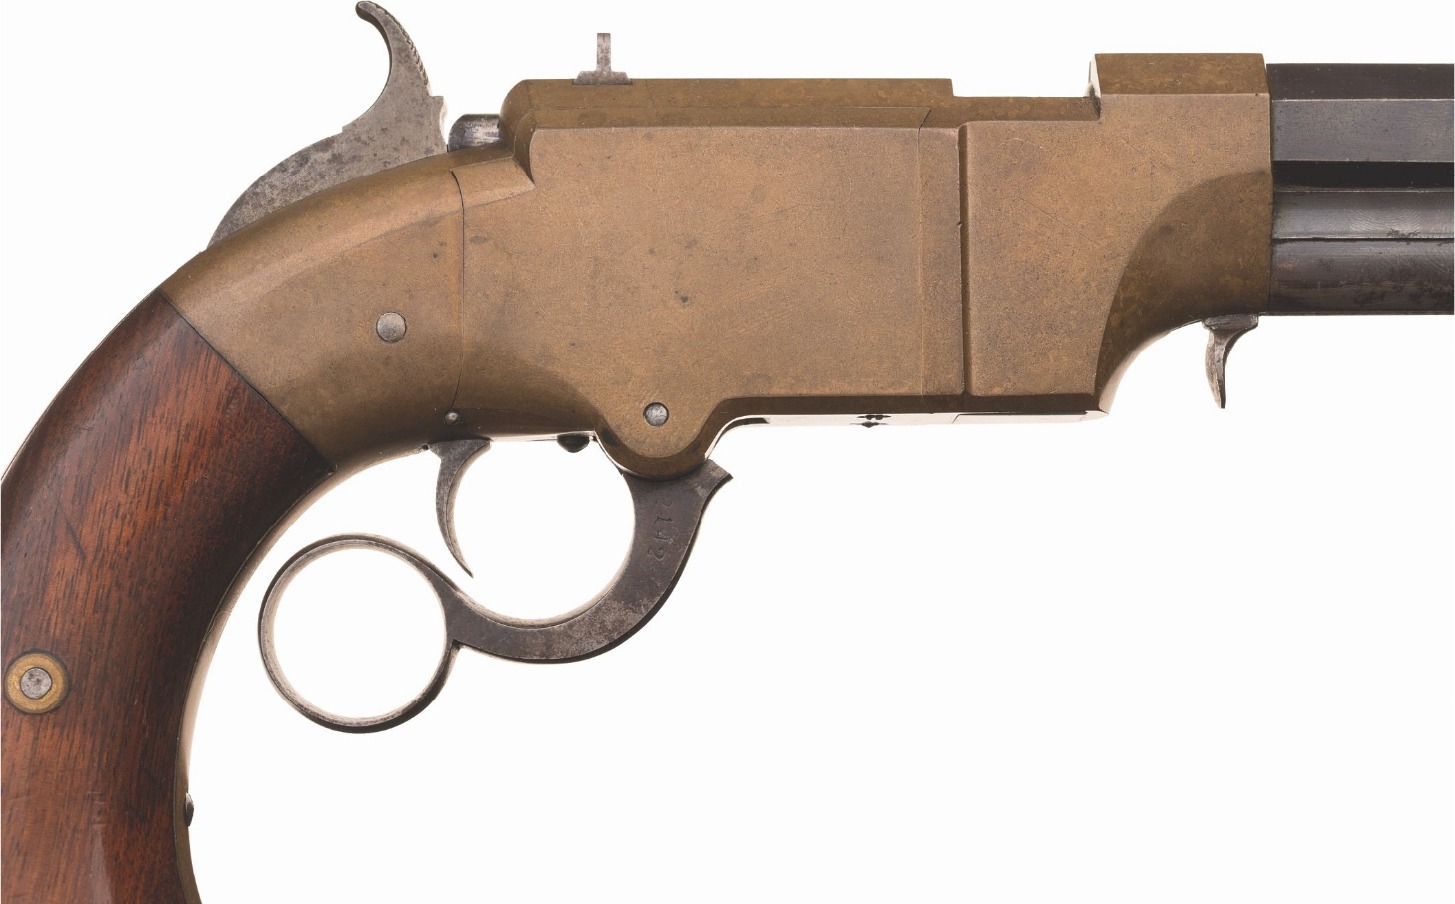 New Haven Arms lever action pistol